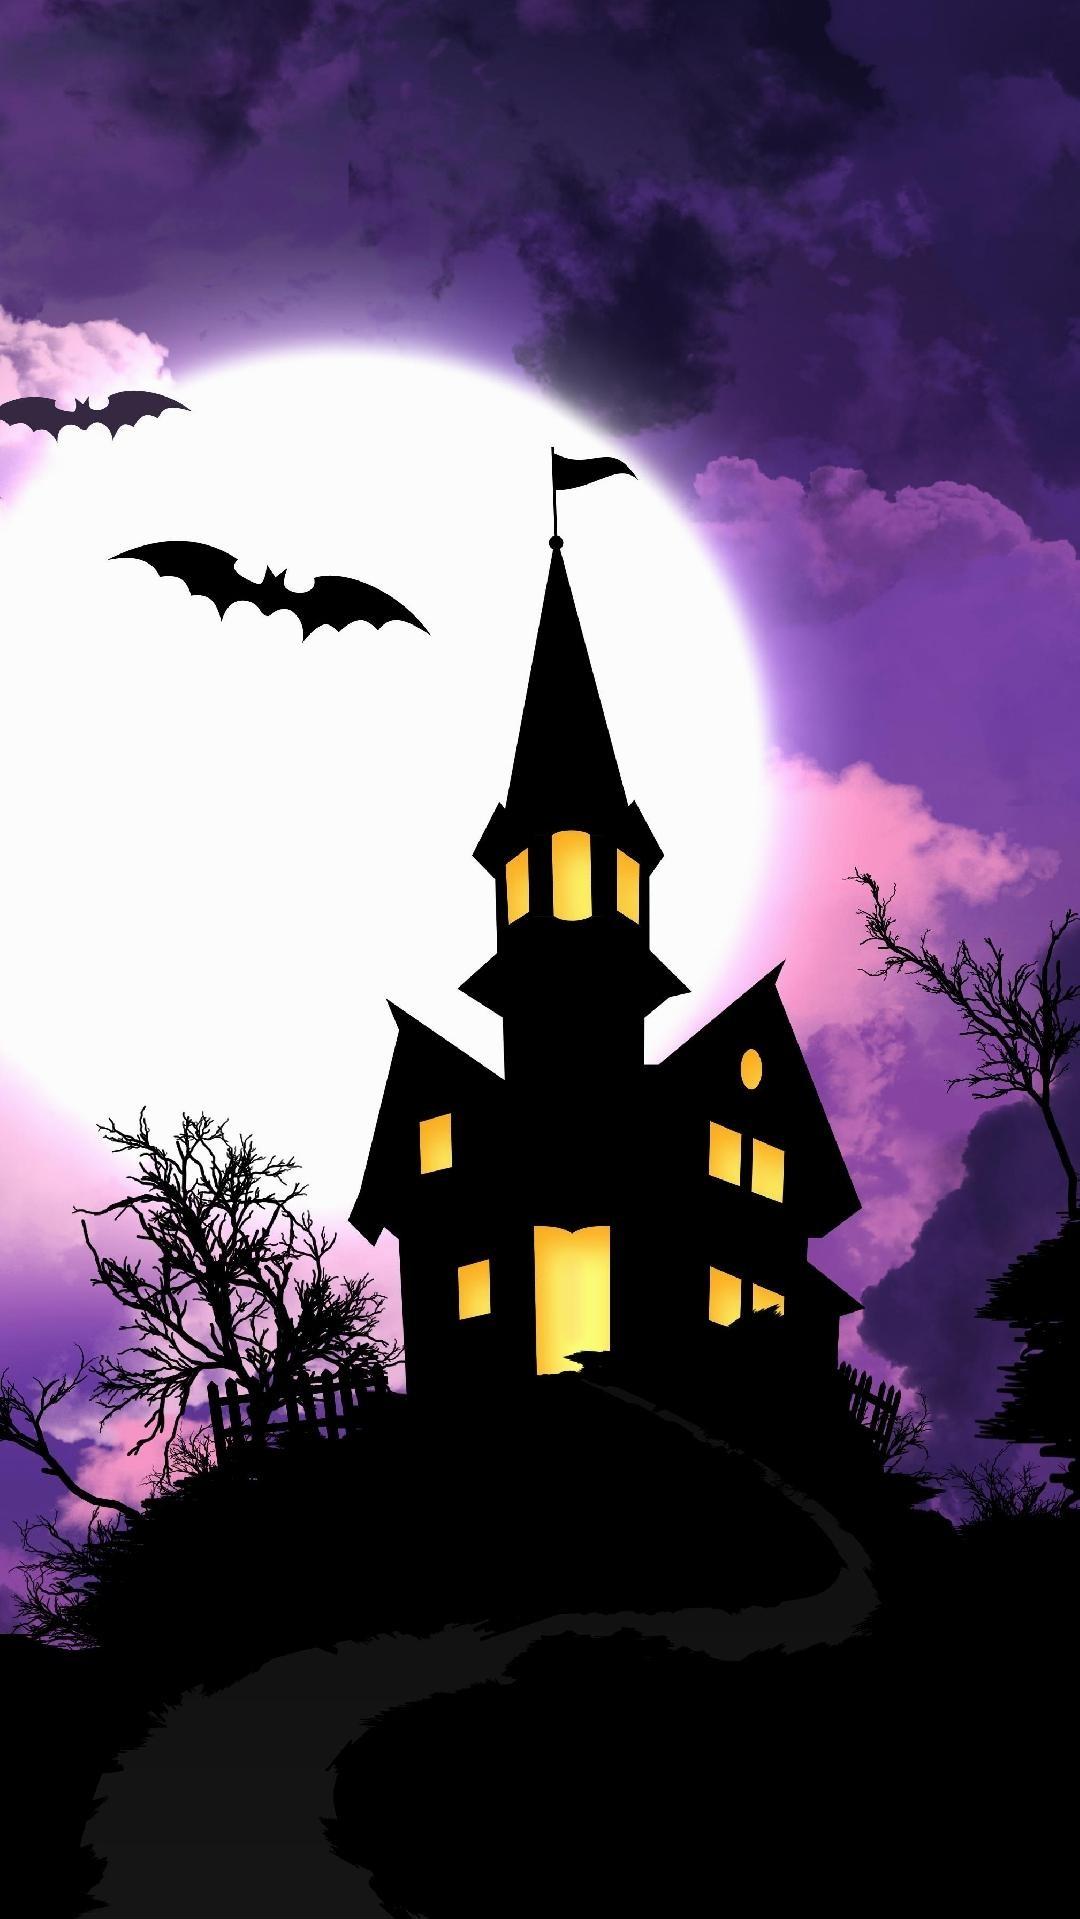 Live Halloween Wallpaper For iPhone Image